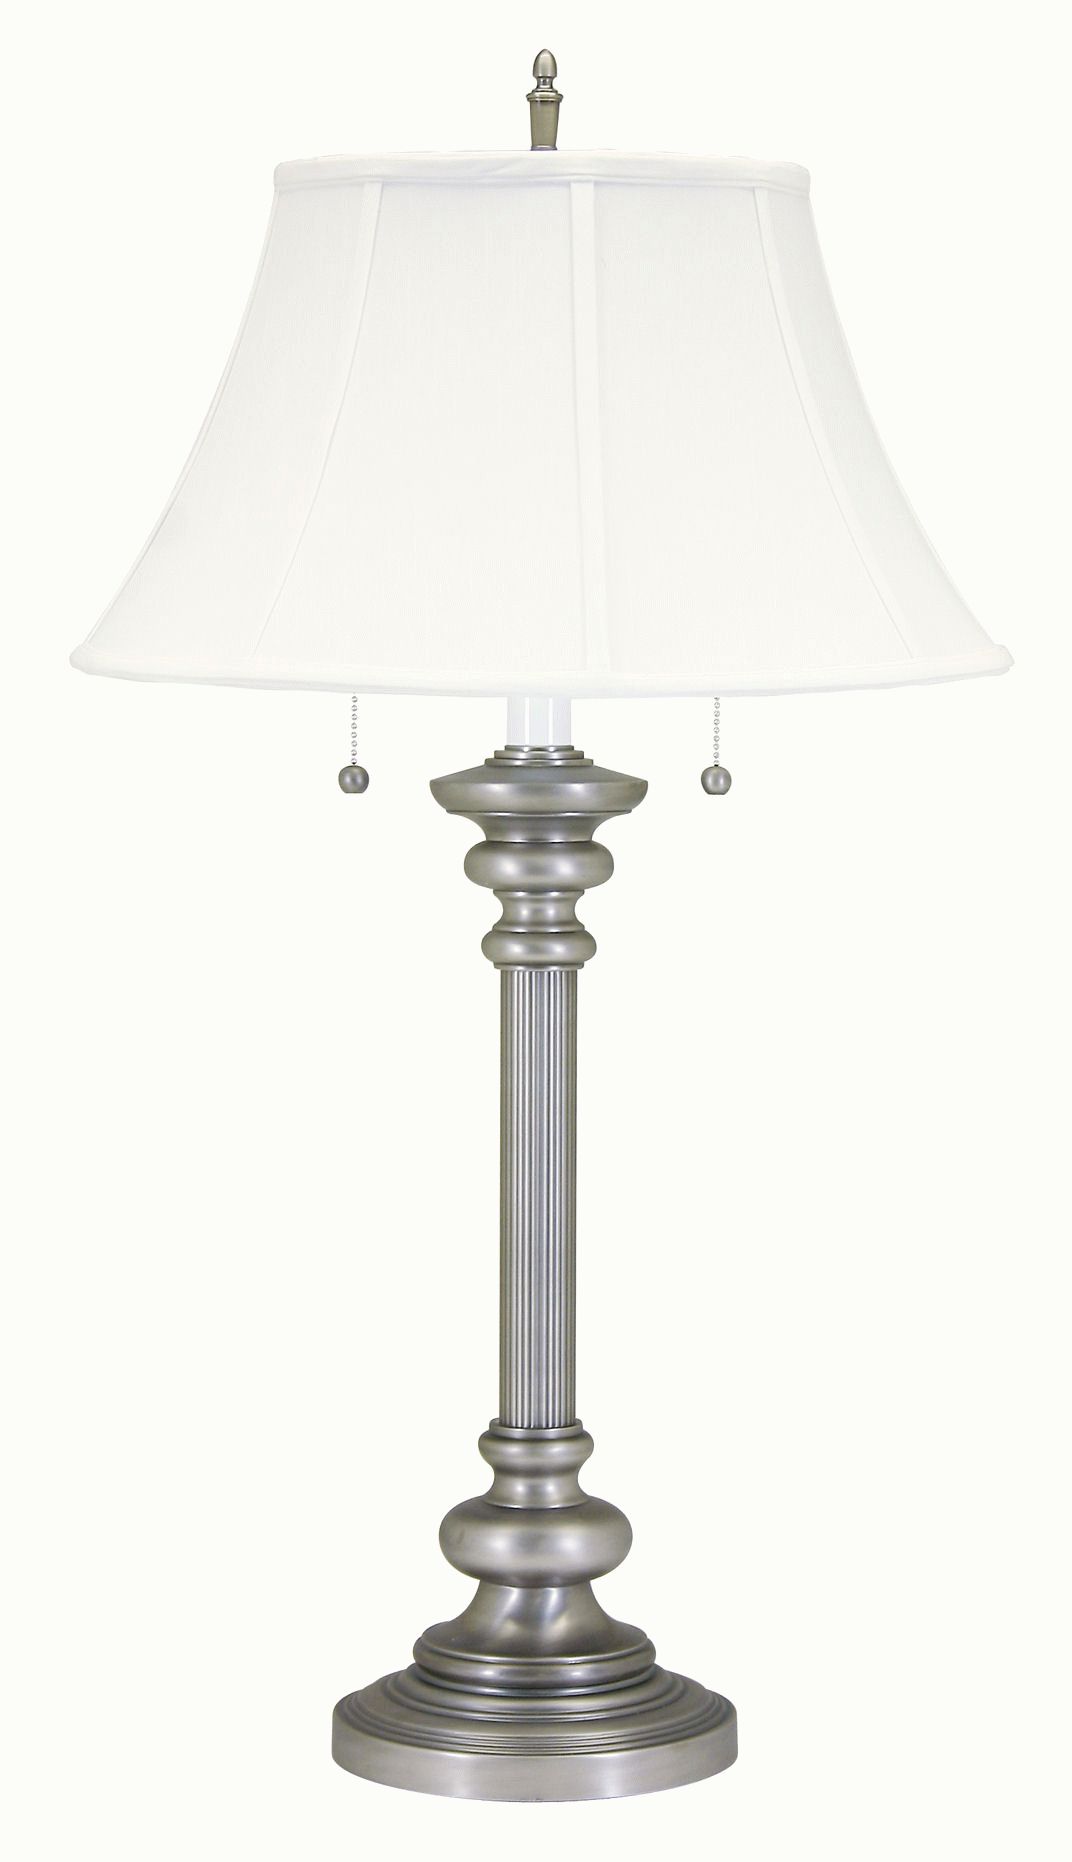 N651 House Of Troy Newport Pull Chain Table Lamp With Regard To Floor Lamps With Dual Pull Chains (View 15 of 20)